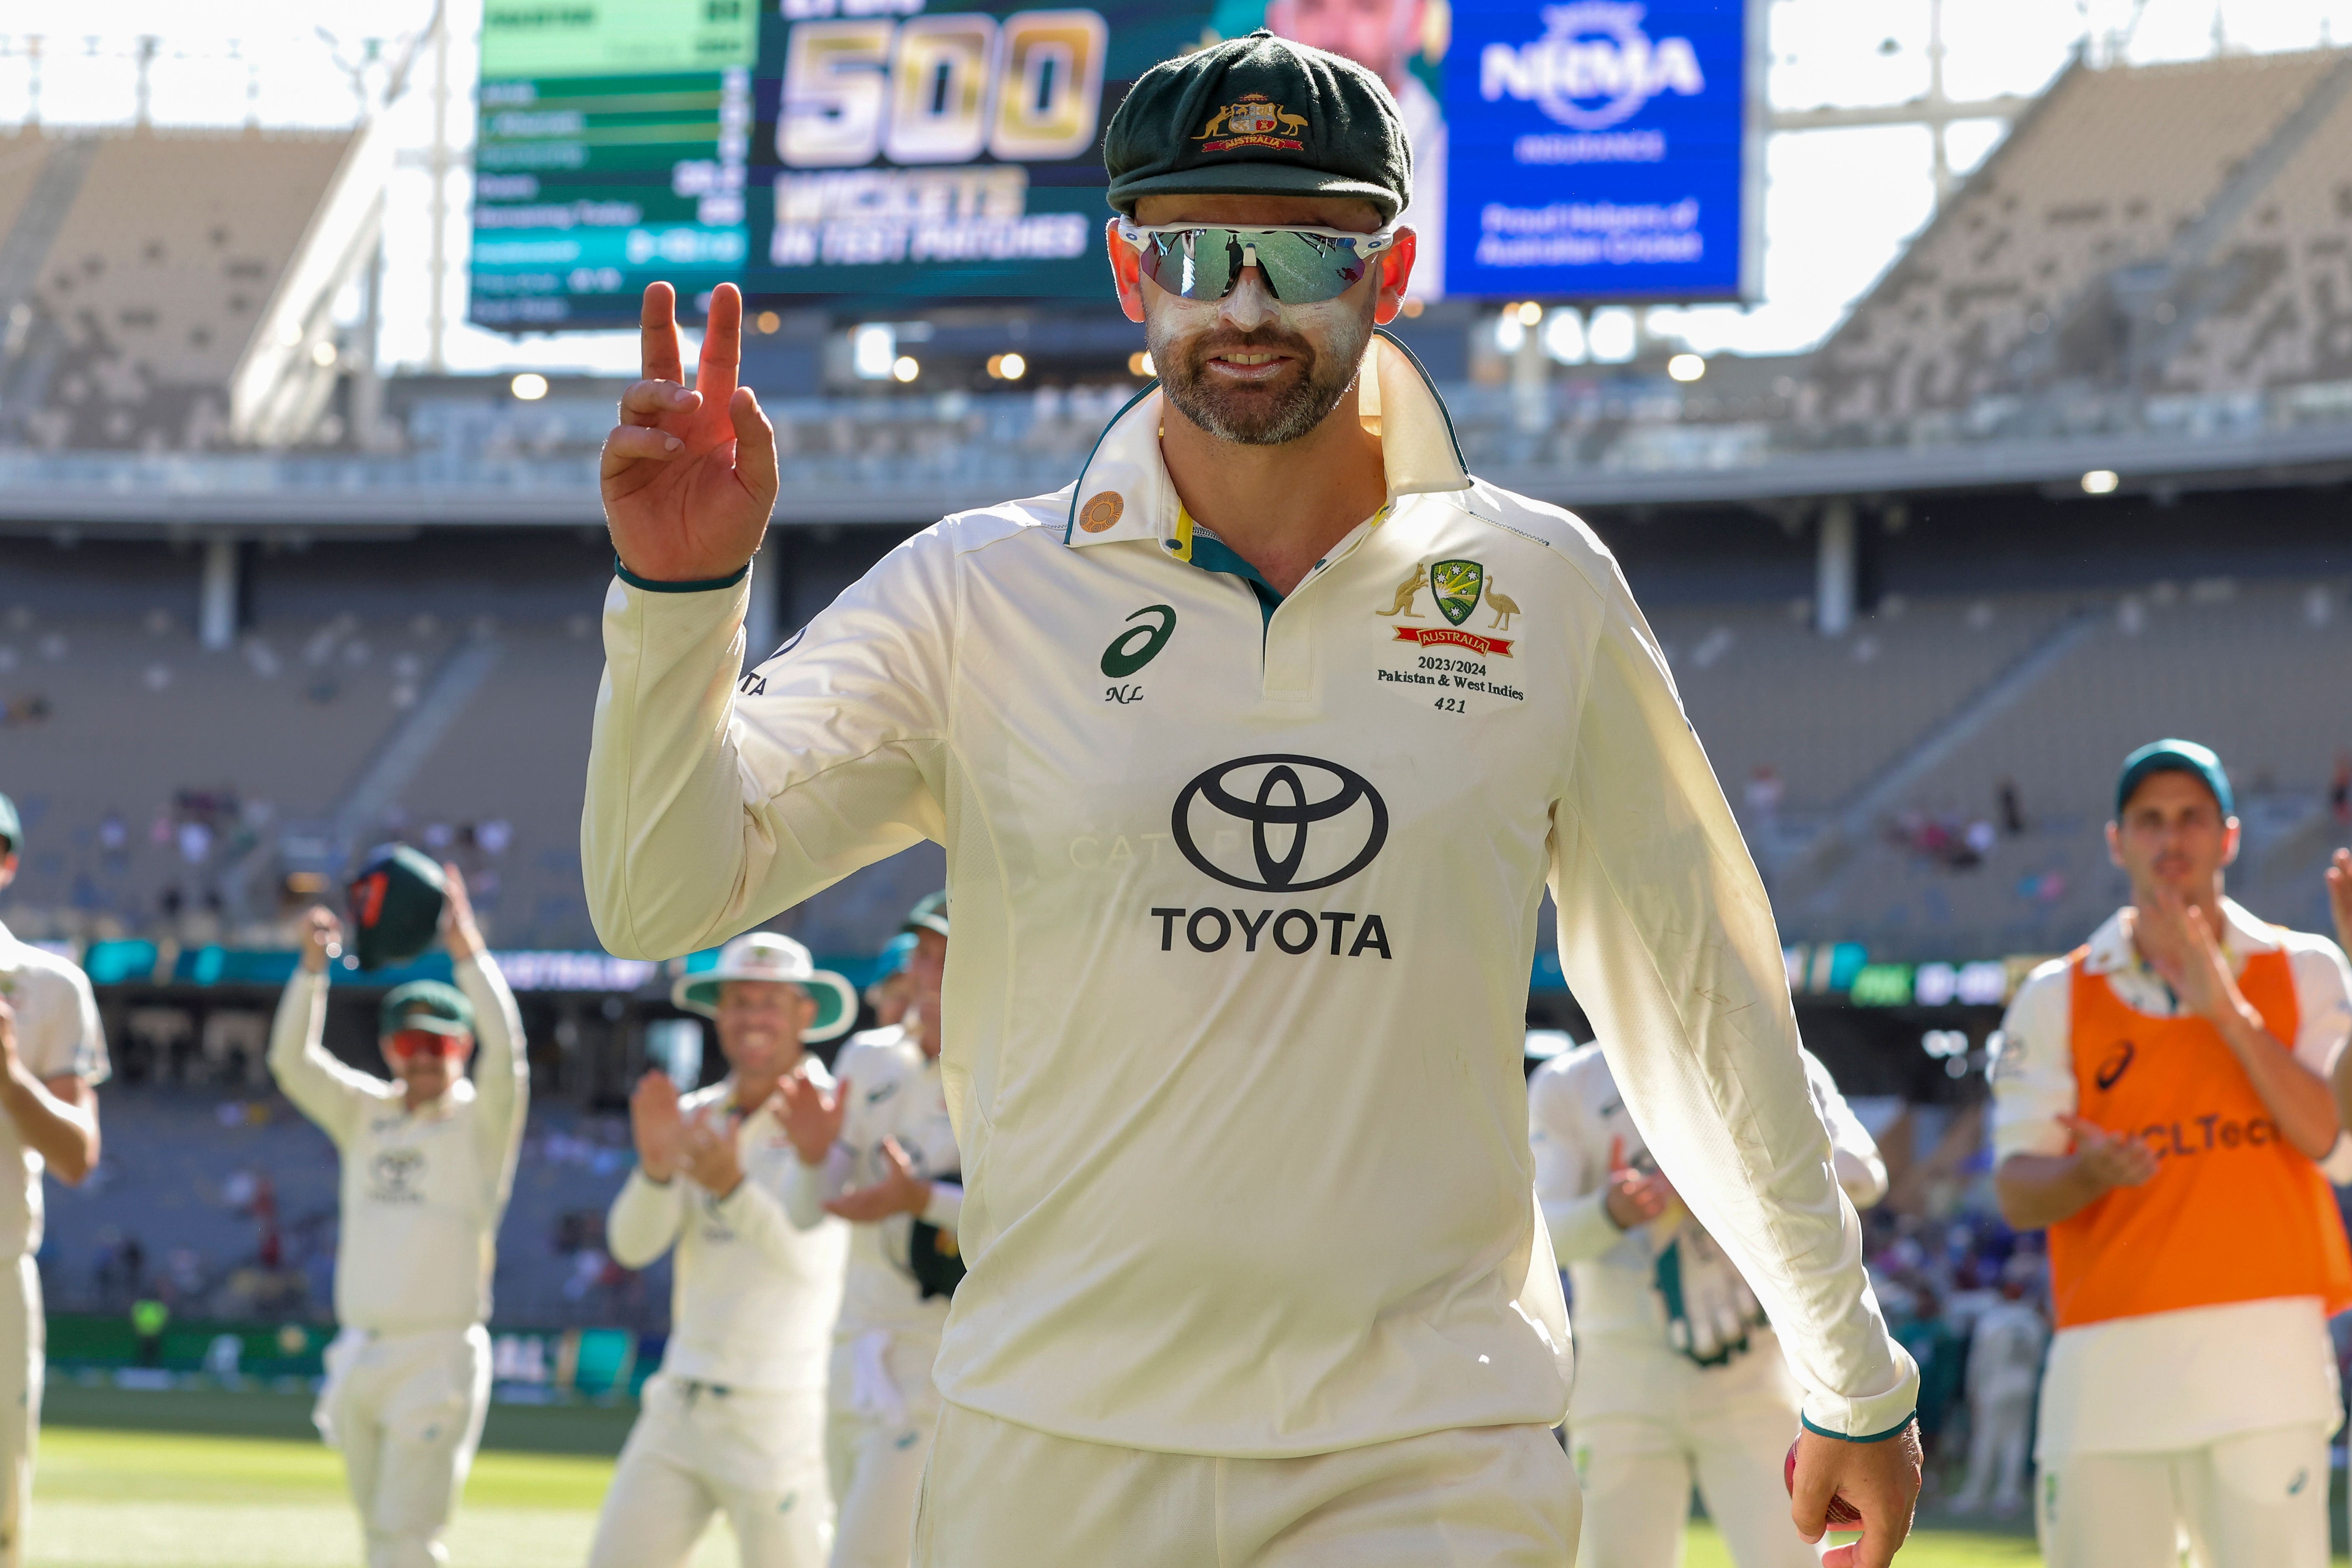 Australia’s Nathan Lyon took his 500th Test wicket in the victory over Pakistan in Perth (Richard Wainwright/AP/PA)